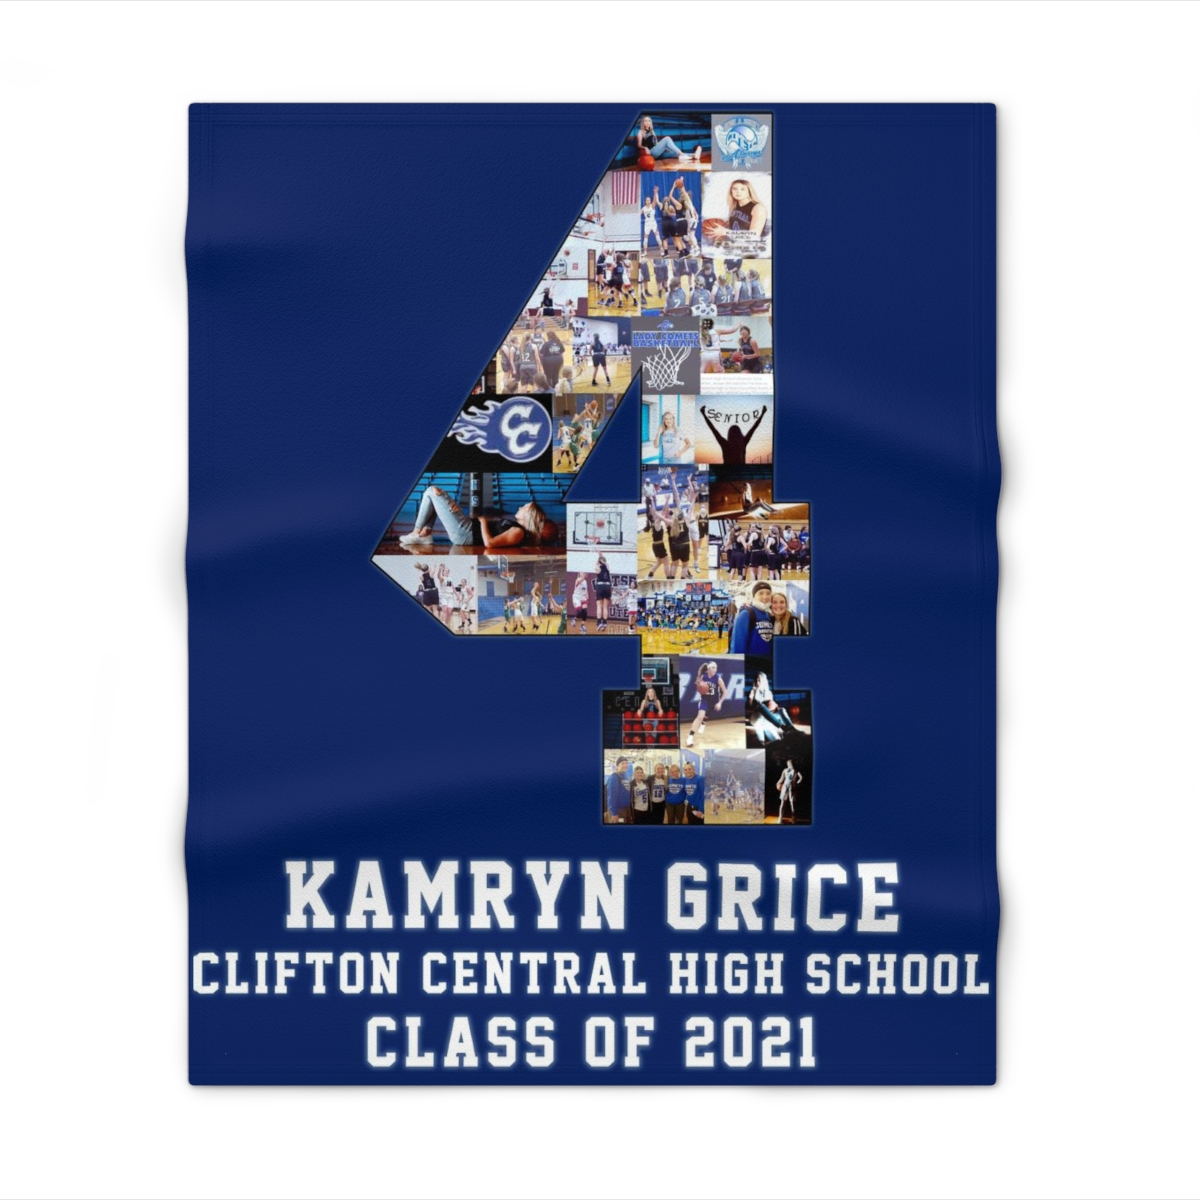 A great quality throw blanket with your player's best memories is an amazing gift for senior night.